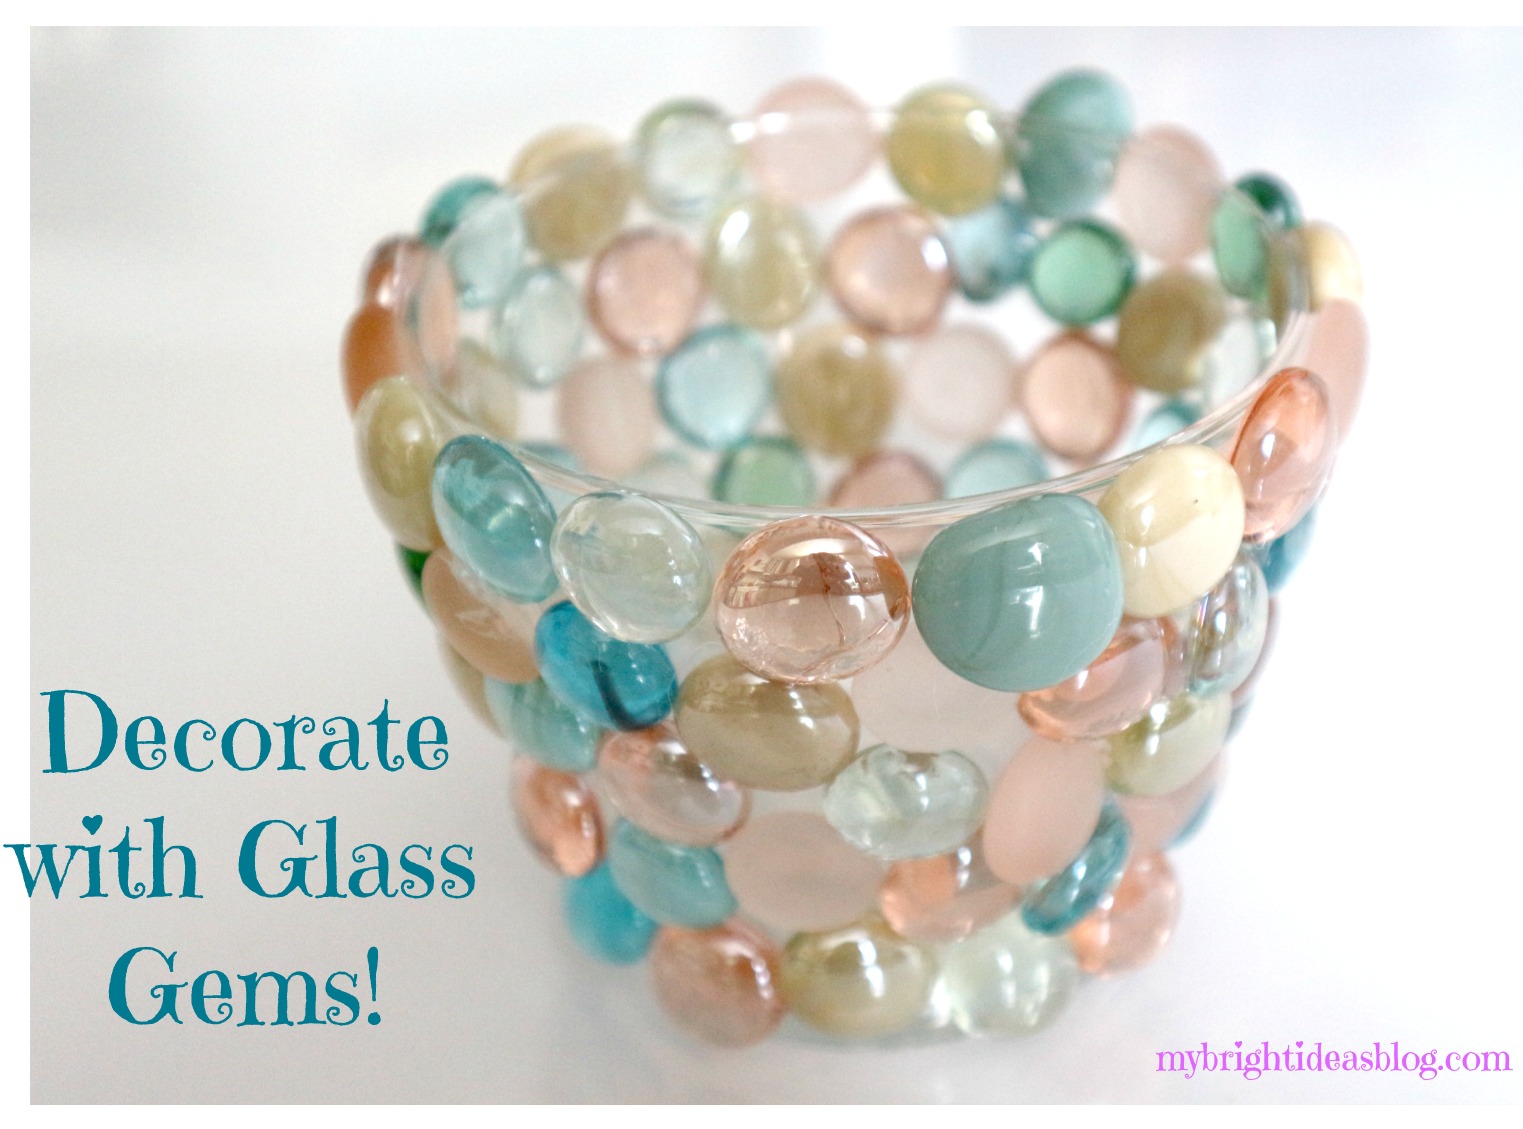 Glass Gems from the Dollar Store or Craft Store. Glue the flat sided marbles to Vase or Candle Holder for a Beautiful Effect! mybrightideasblog.com